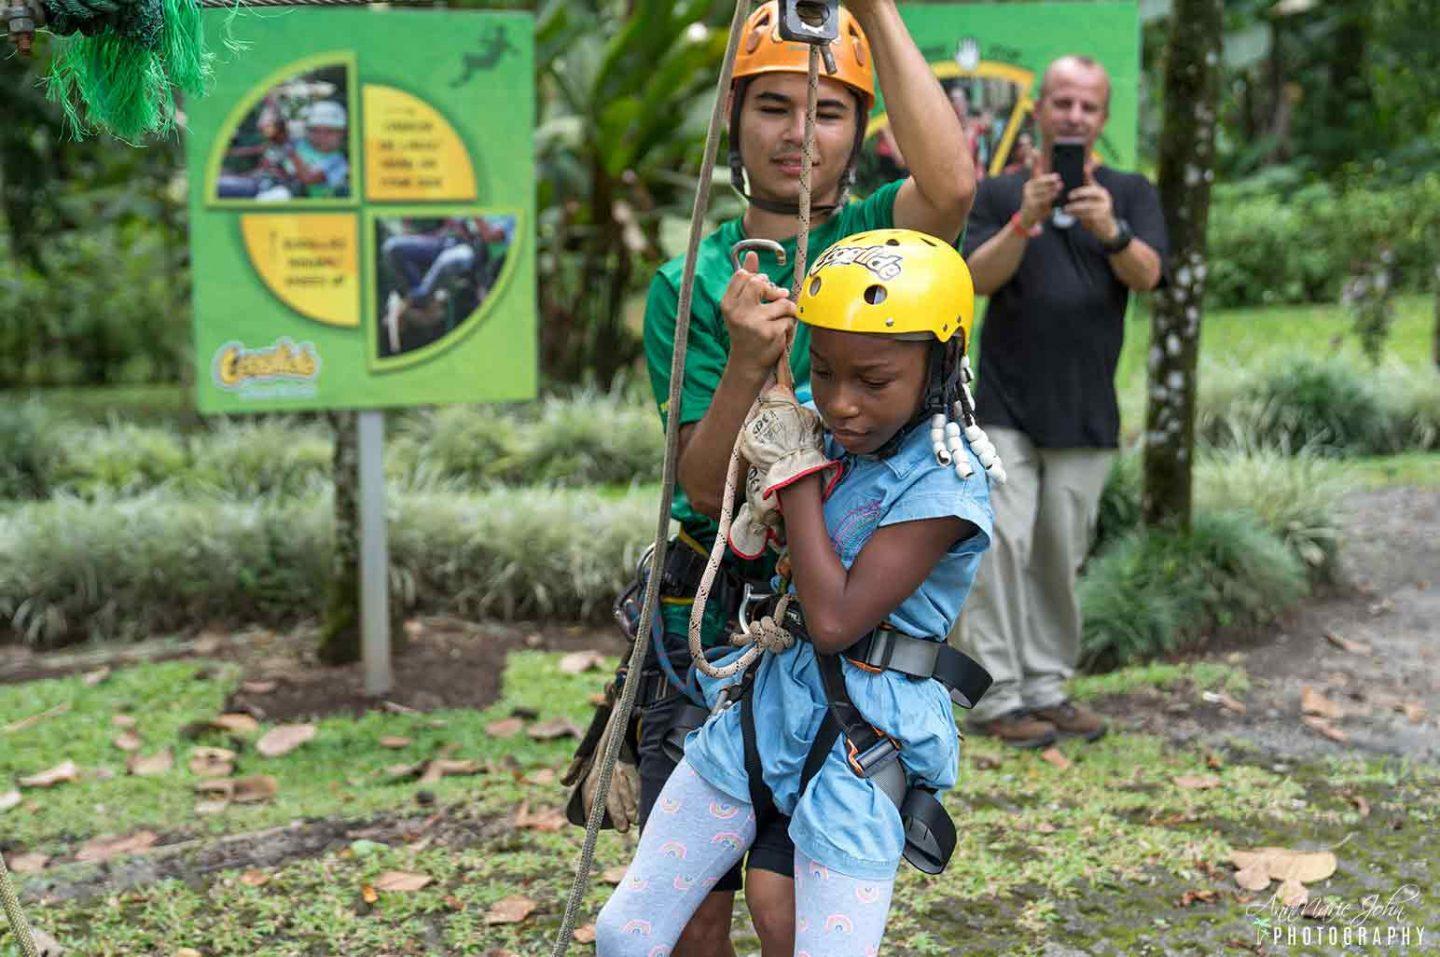 What You Should Know Before You Go Ziplining